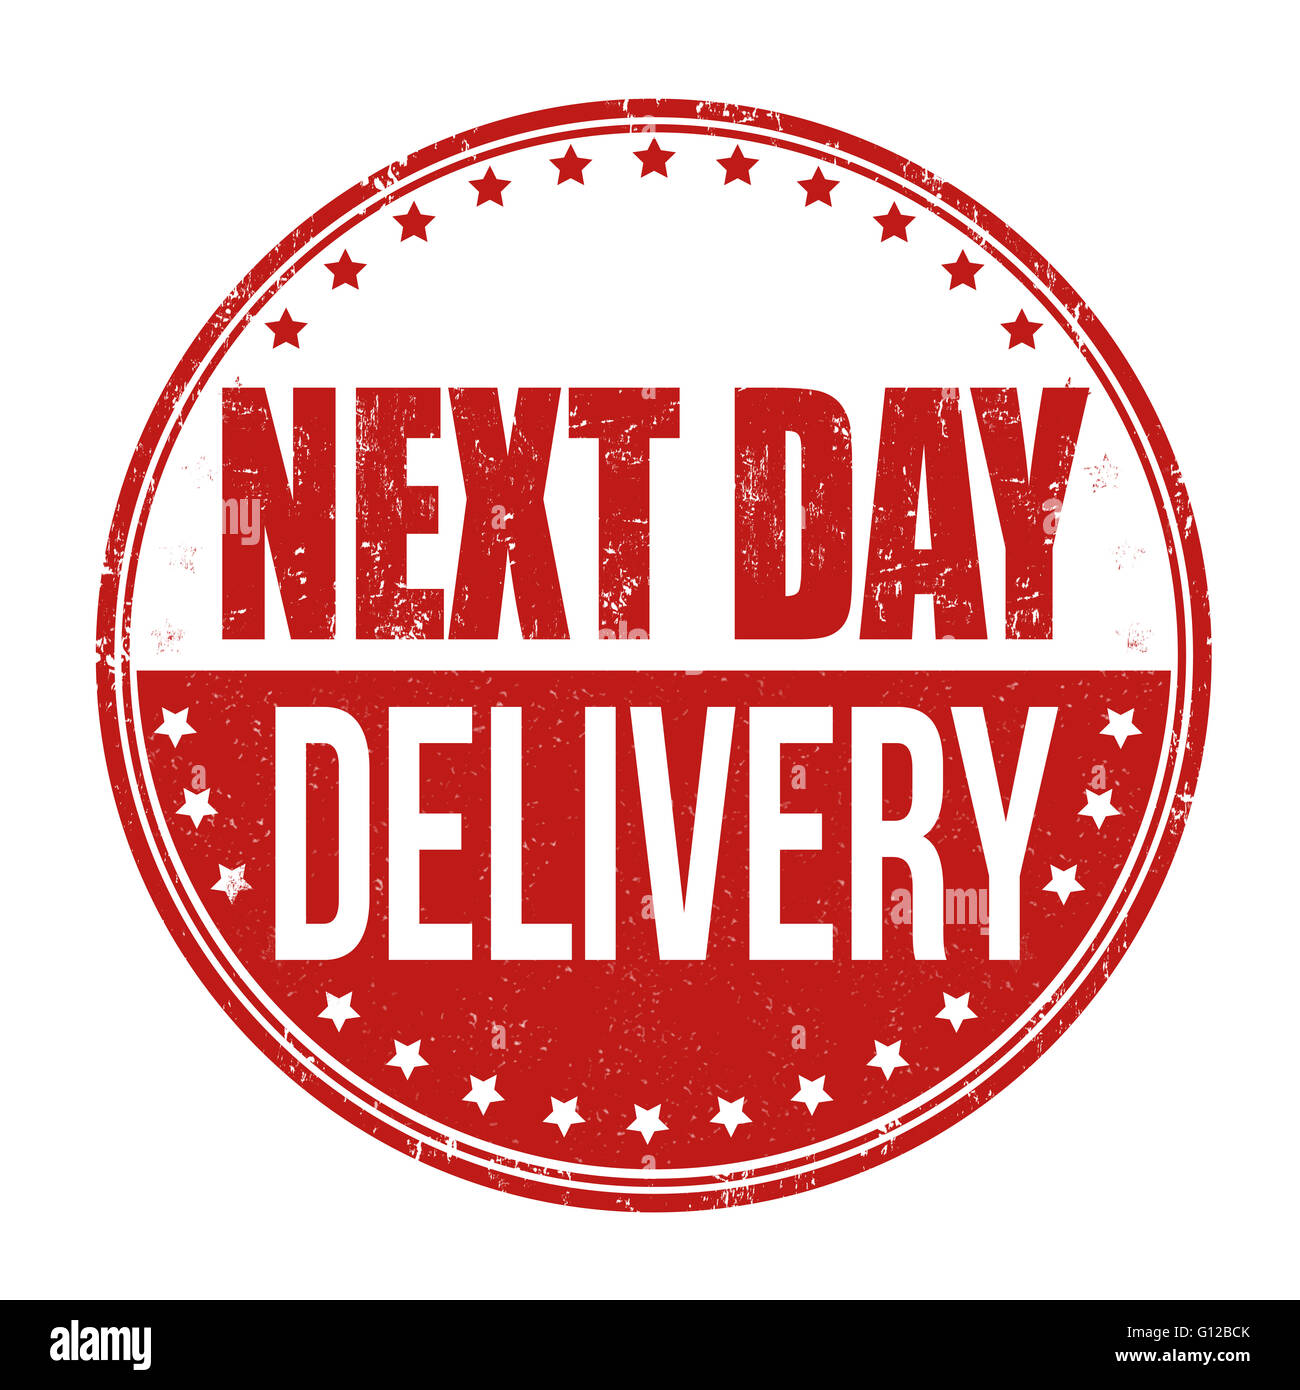 Next day delivery grunge rubber stamp on white background, vector